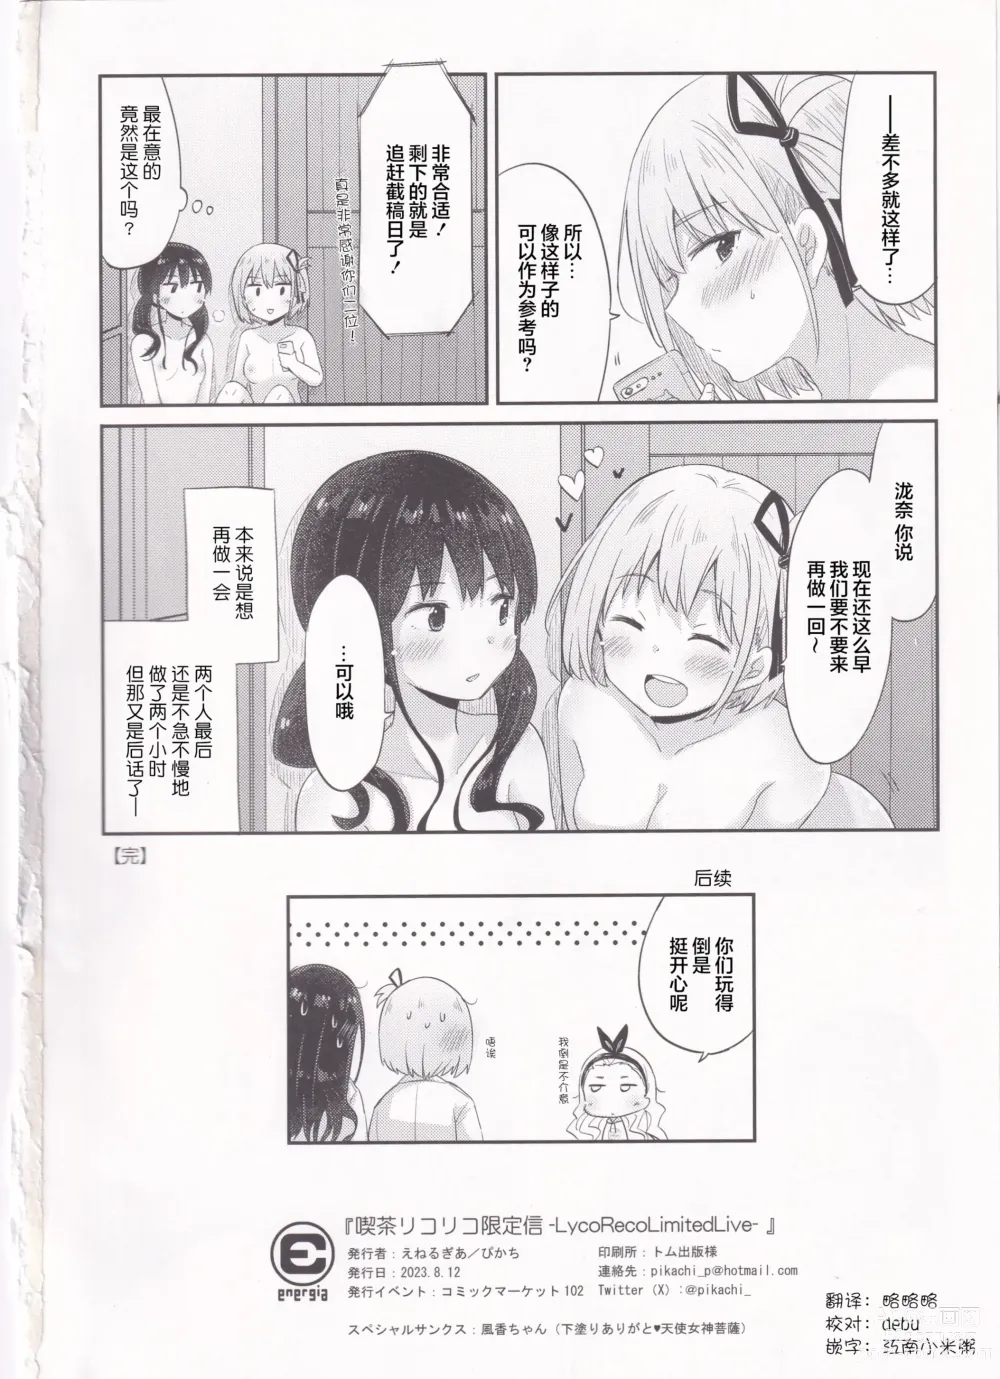 Page 19 of doujinshi 莉可利丝限定直播